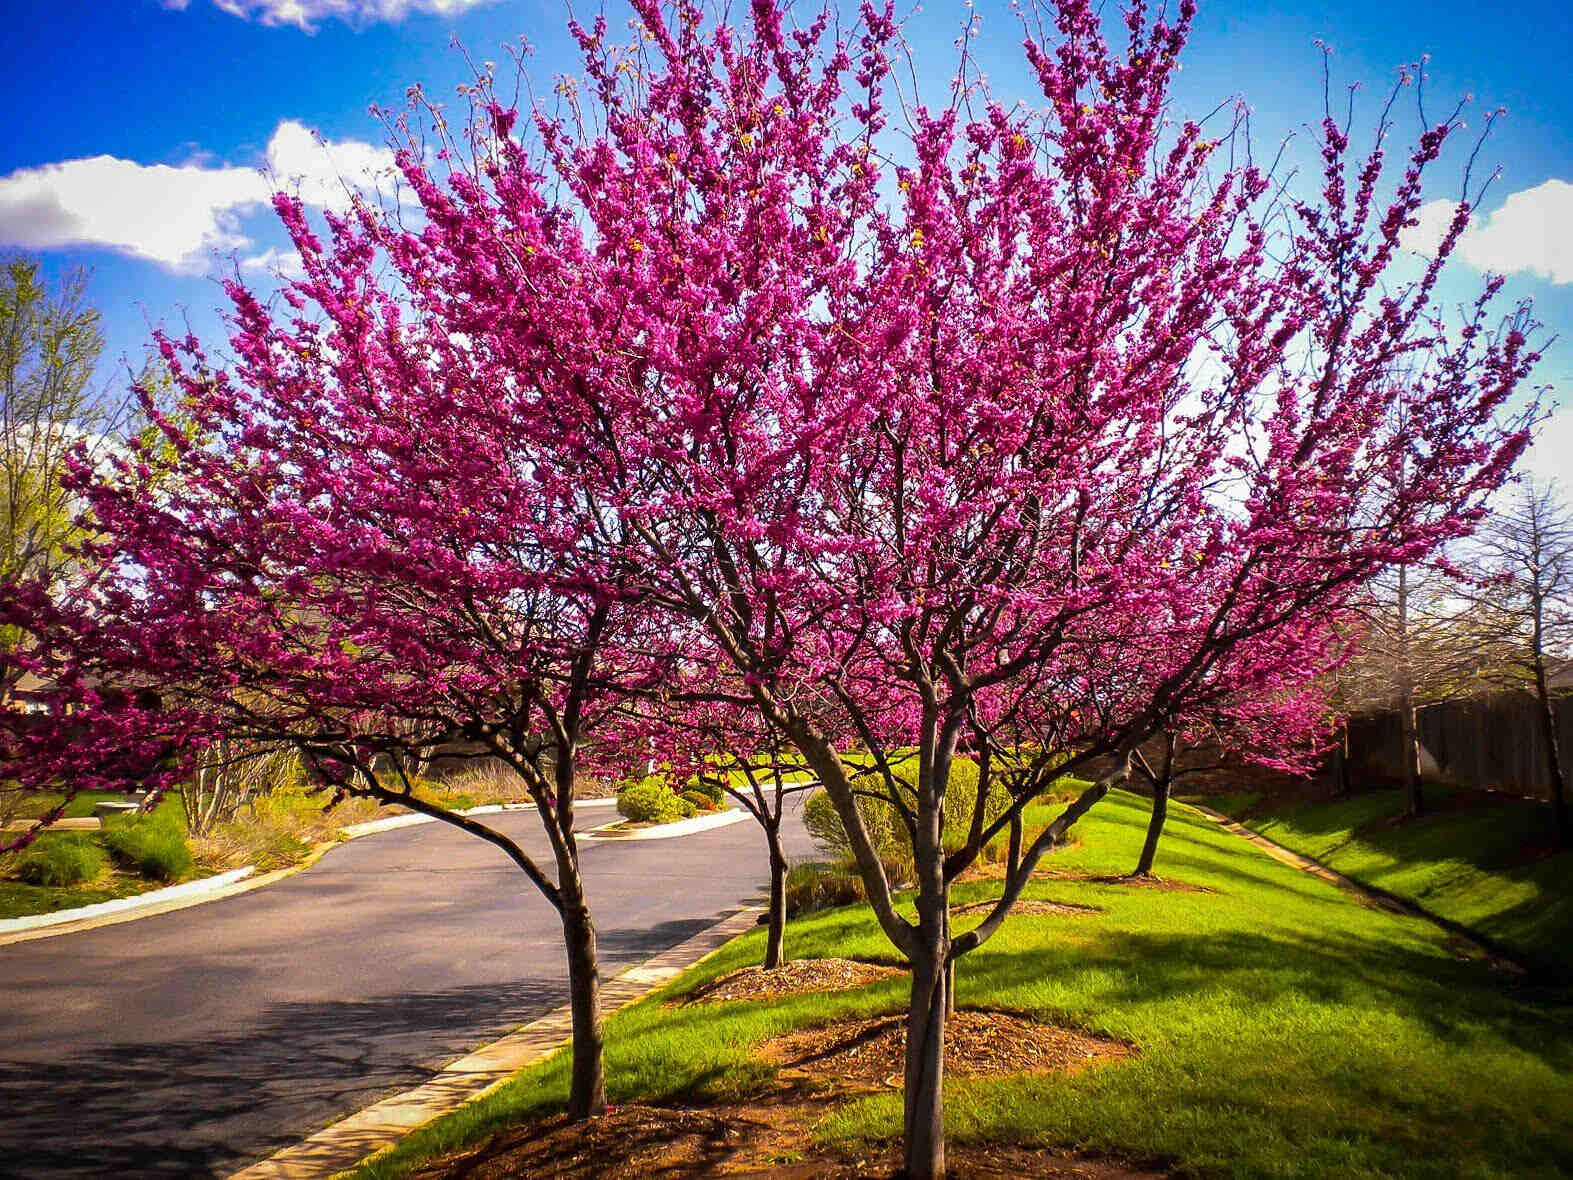 How To Grow A Redbud Tree From Seed